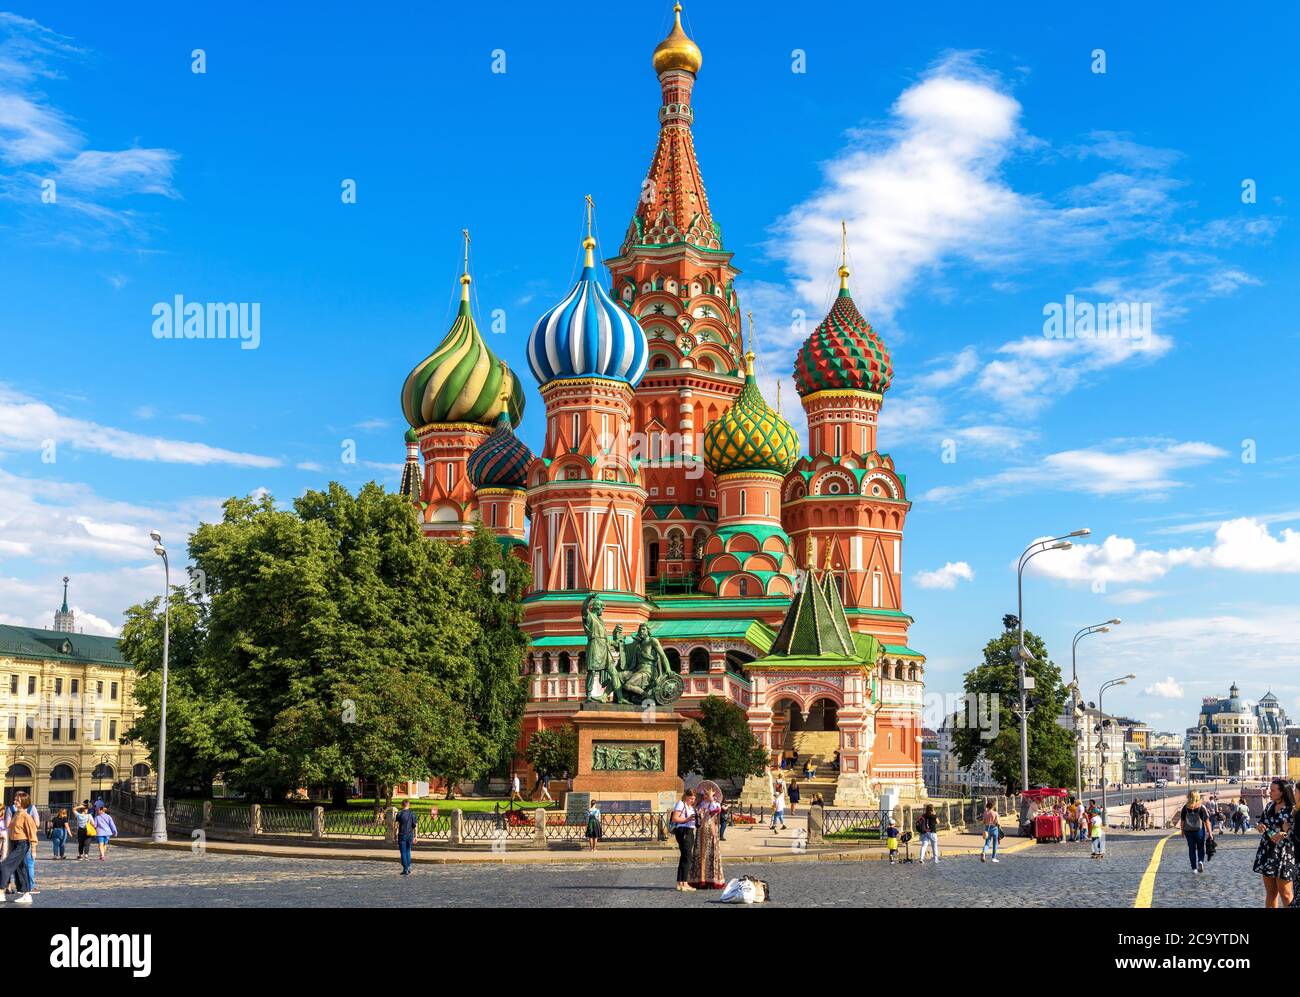 Moscow - July 20, 2020: St Basil`s cathedral on Red Square in Moscow, Russia. Beautiful ancient Saint Basil`s church is famous tourist attraction of c Stock Photo